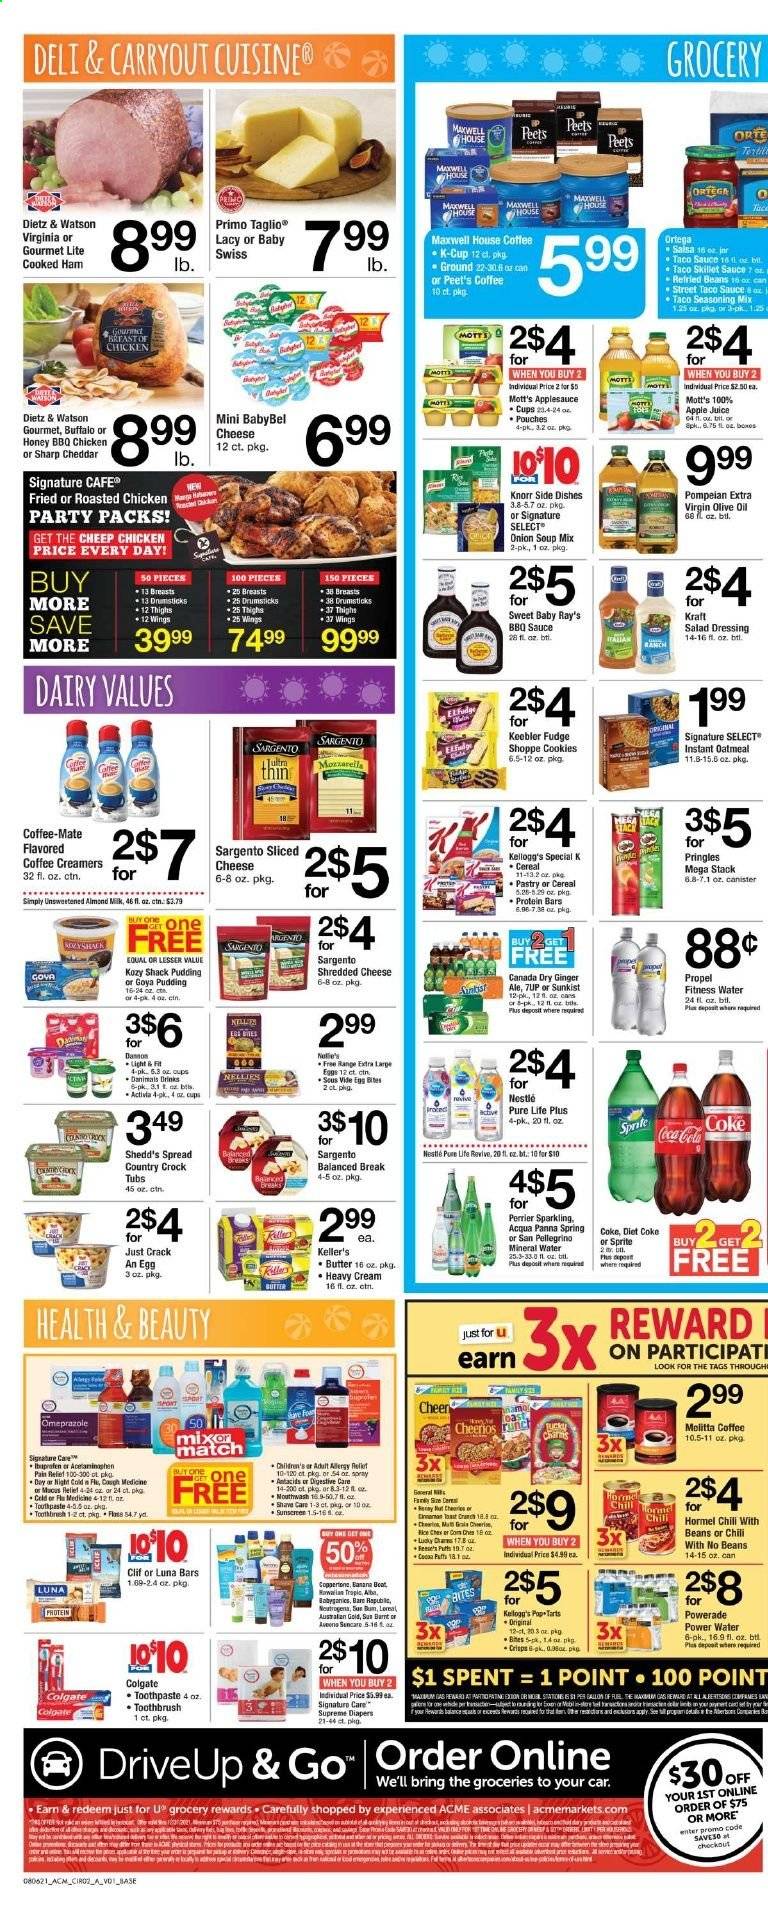 thumbnail - ACME Flyer - 08/06/2021 - 08/12/2021 - Sales products - Mott's, chicken roast, onion soup, soup mix, soup, Knorr, Kraft®, Hormel, cooked ham, ham, Dietz & Watson, mozzarella, shredded cheese, sliced cheese, cheddar, Babybel, Sargento, pudding, Activia, almond milk, Coffee-Mate, butter, cookies, fudge, Nestlé, Kellogg's, Pop-Tarts, Keebler, Pringles, oatmeal, refried beans, Goya, Cheerios, protein bar, spice, BBQ sauce, salad dressing, taco sauce, dressing, extra virgin olive oil, olive oil, oil, apple sauce, apple juice, Canada Dry, Coca-Cola, ginger ale, Sprite, Powerade, juice, Diet Coke, 7UP, Cerés, Perrier, mineral water, San Pellegrino, Maxwell House, coffee capsules, K-Cups, nappies, Colgate, toothbrush, toothpaste, pain relief. Page 2.